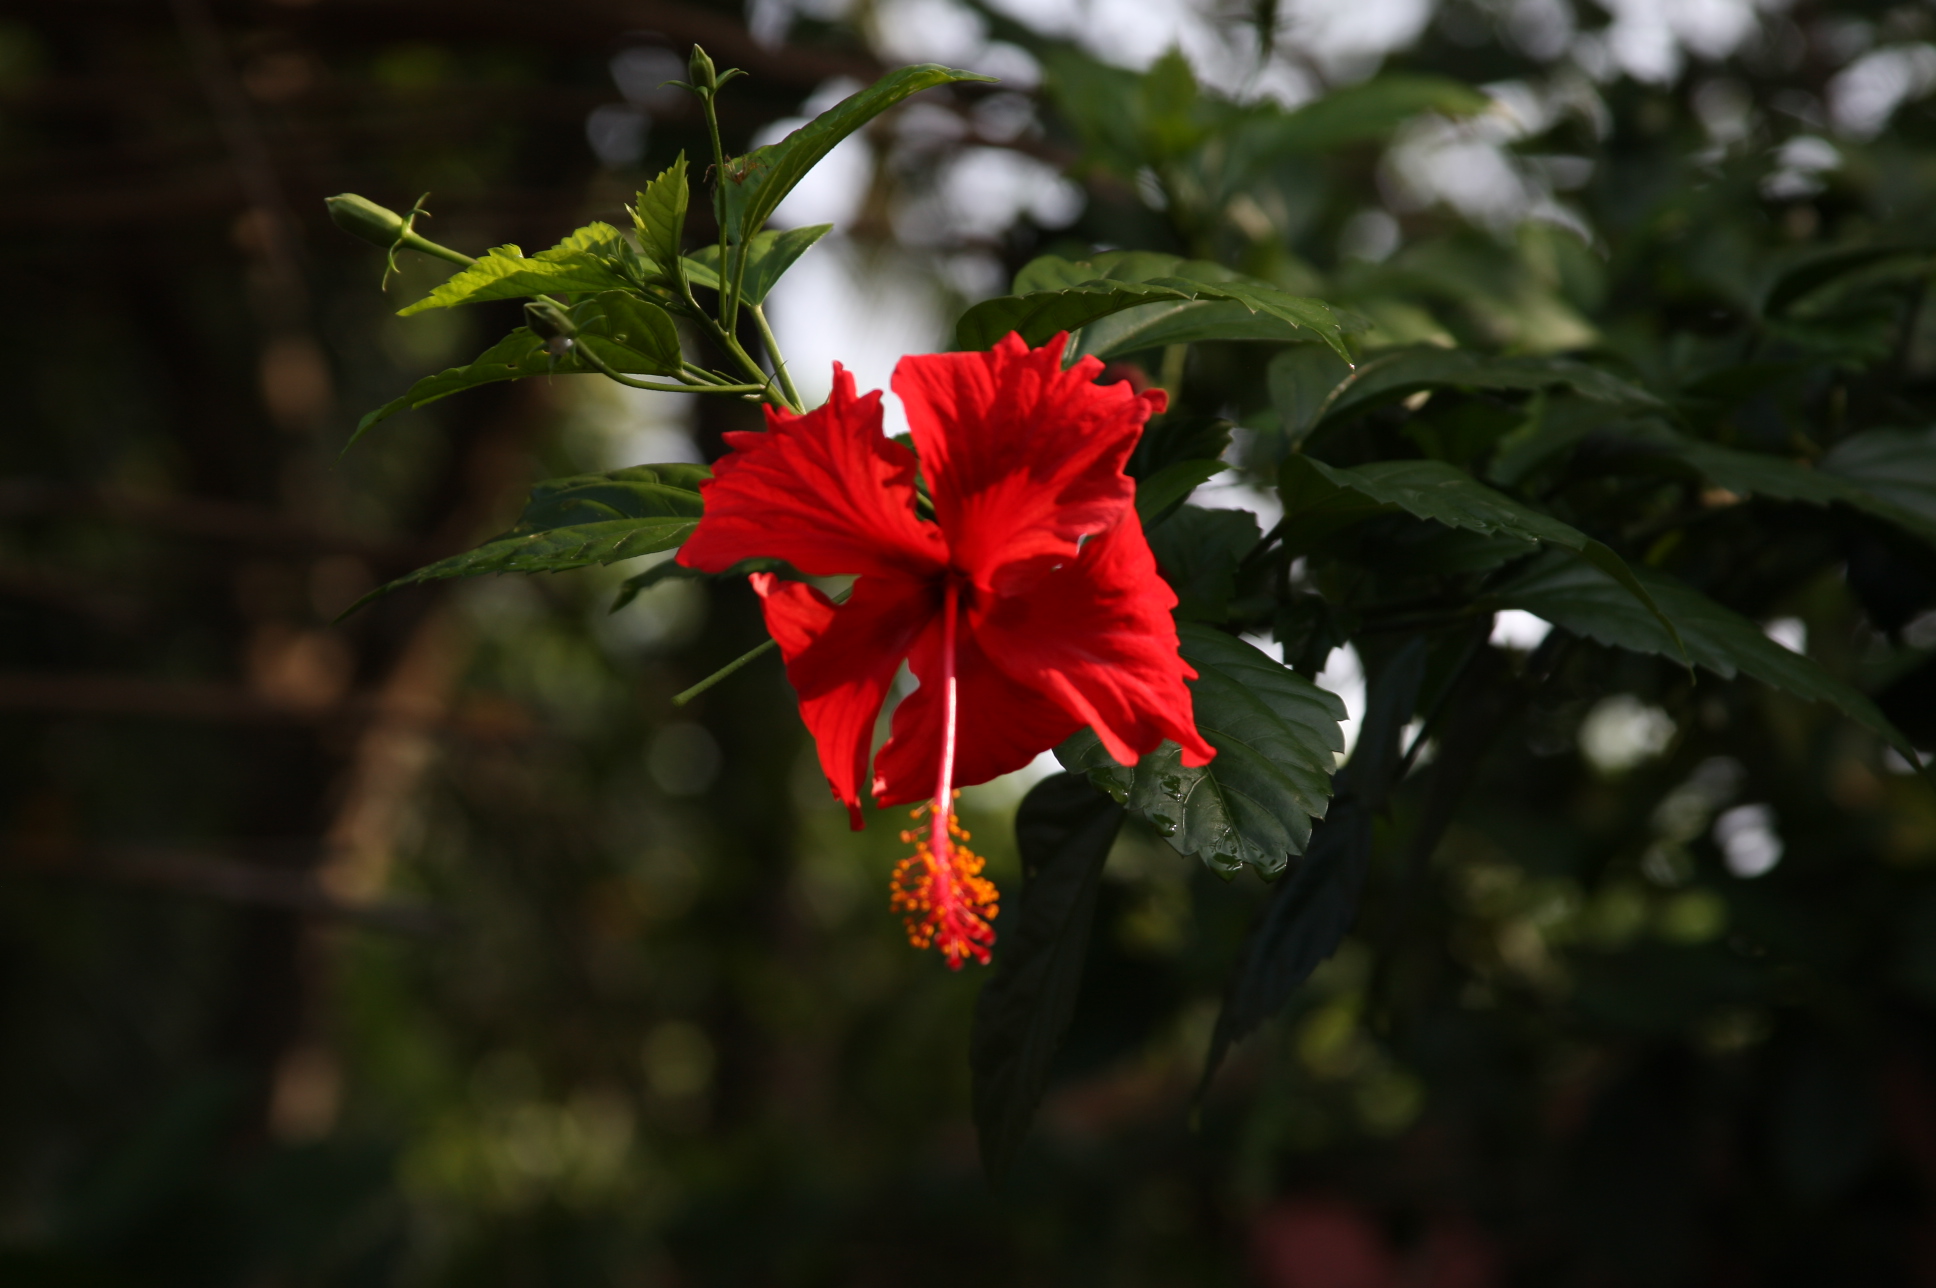 Hibiscus relieve menstrual troubles and acts as a relieving coolant on those sultry summer days